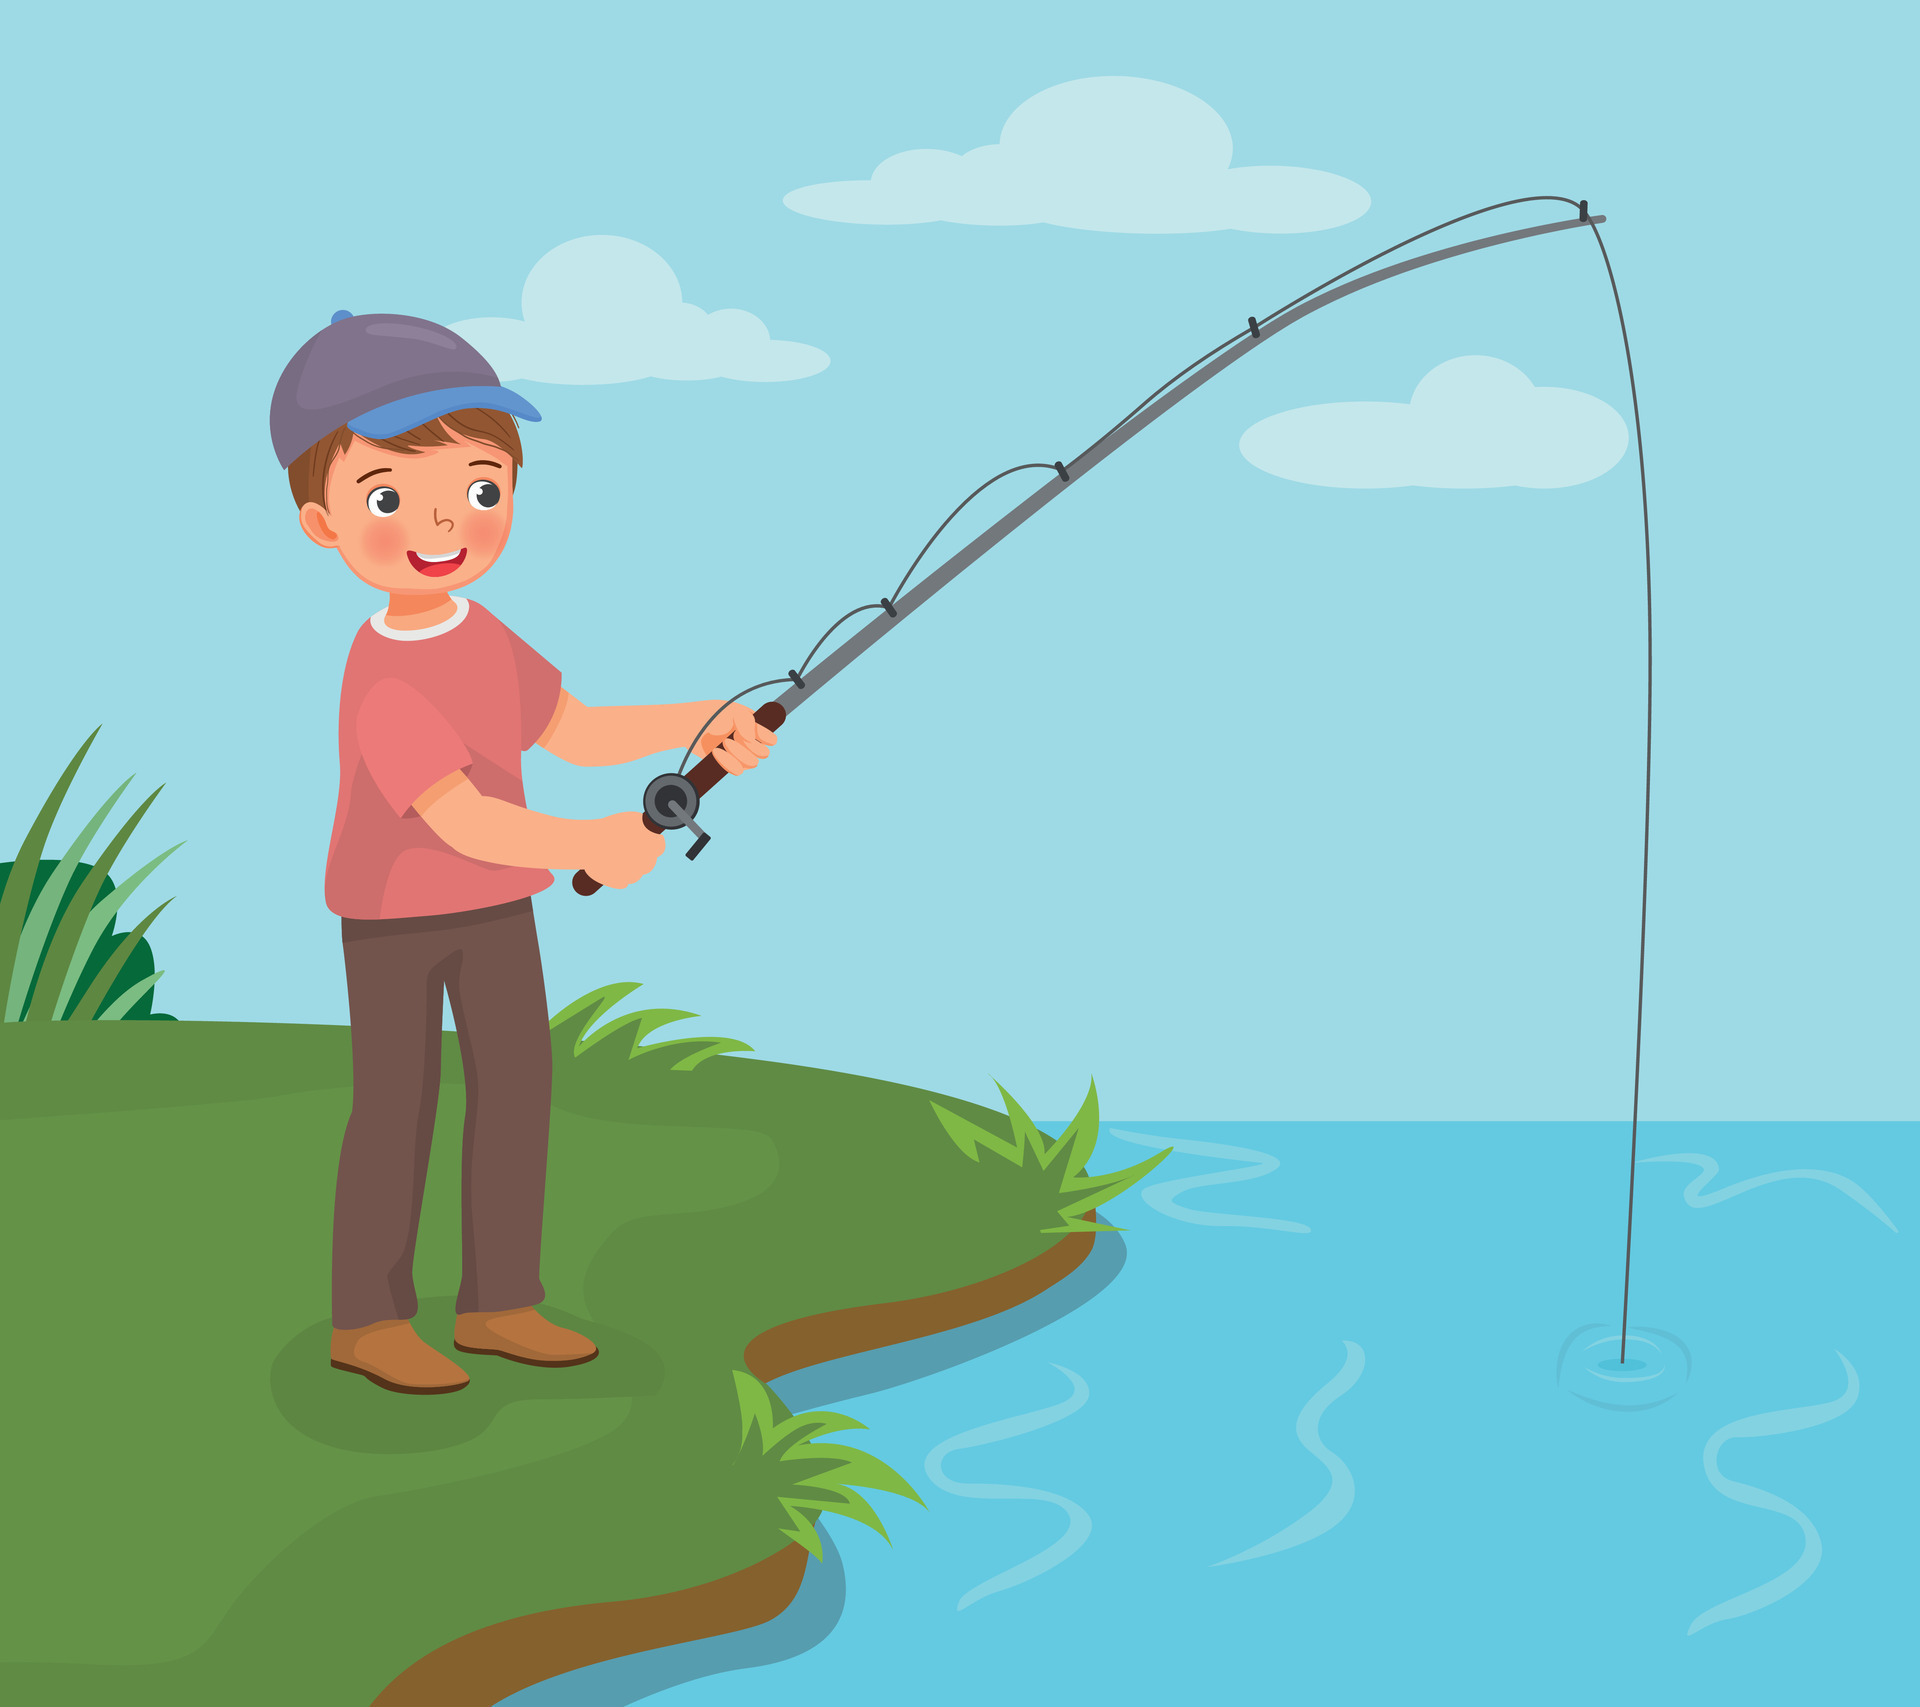 Cute little boy fishing at the river holding a fishing rod